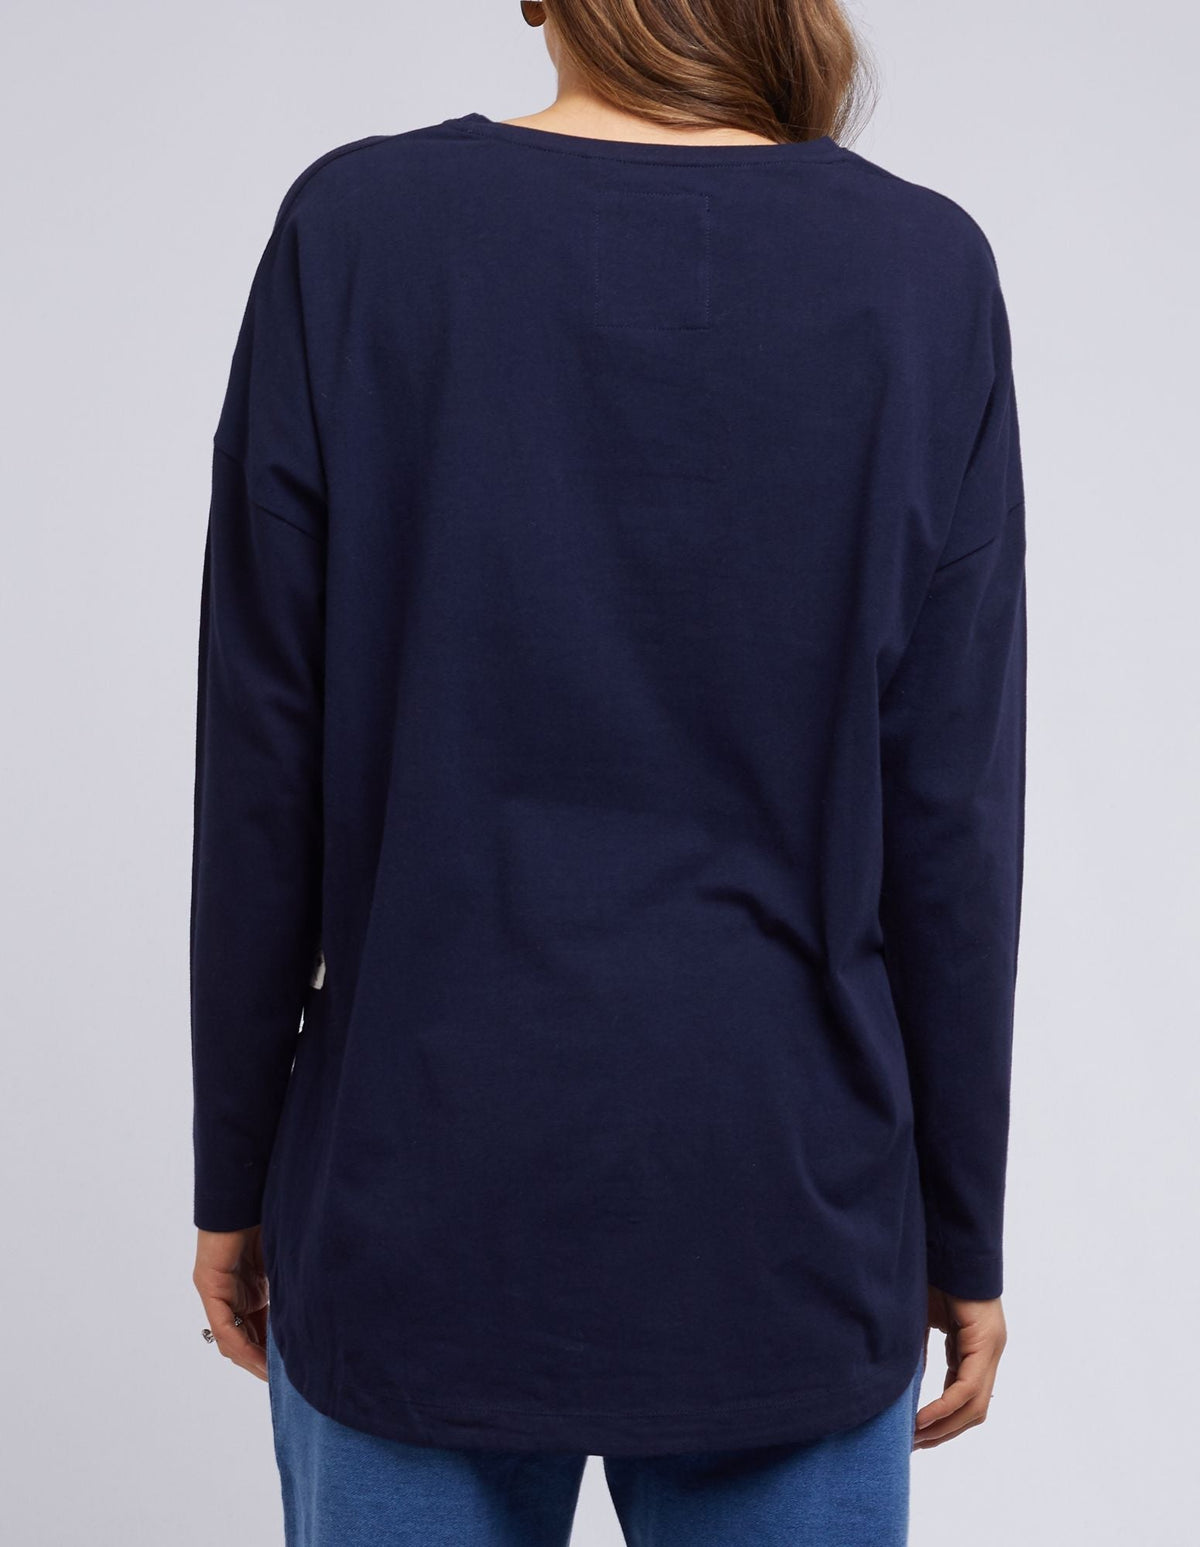 Society L/S Tee - Navy - Elm Lifestyle - FUDGE Gifts Home Lifestyle